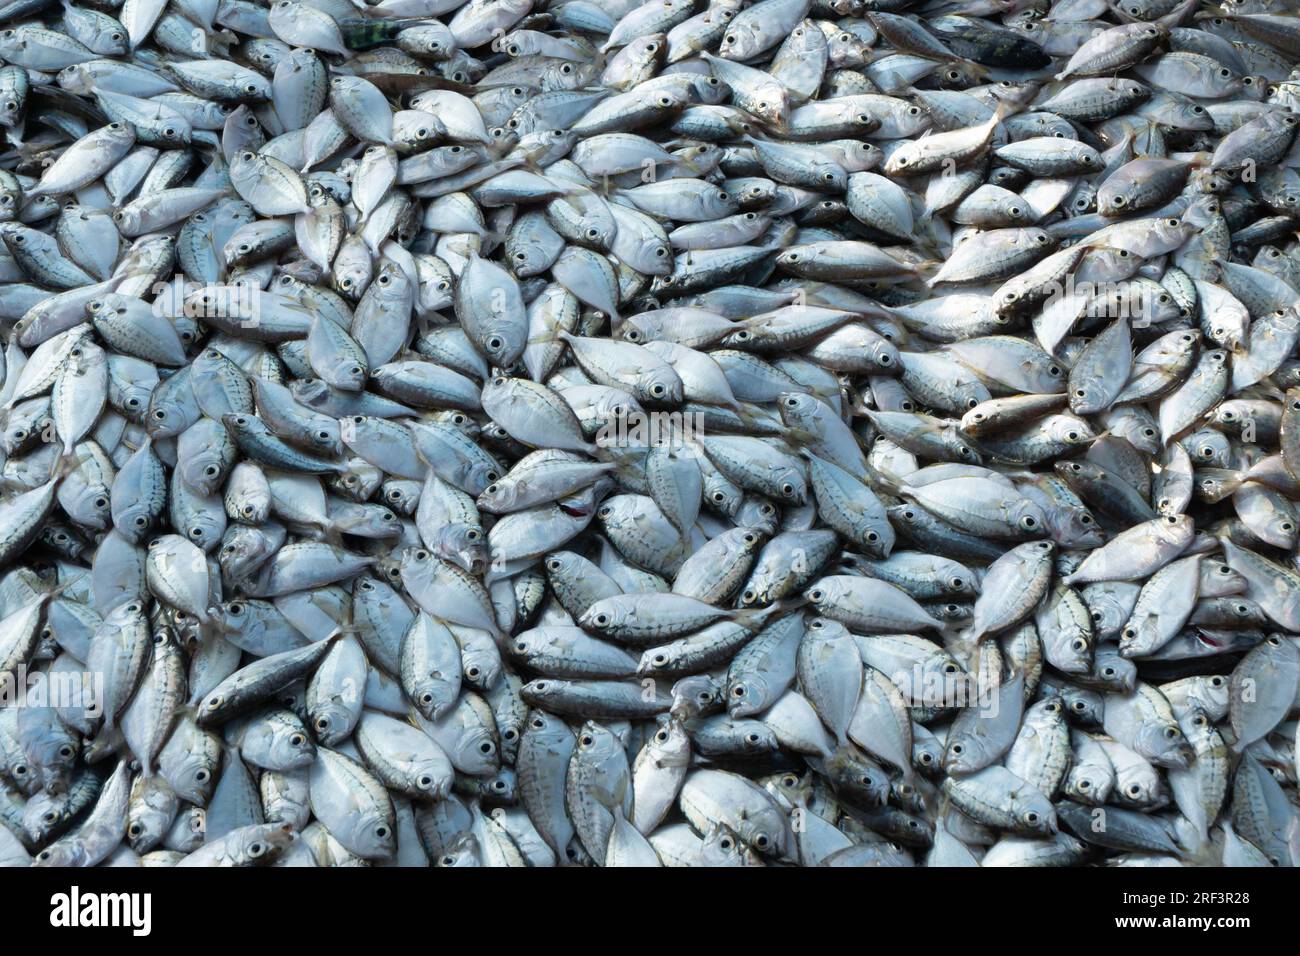 Close-up of a Pile of Freshly Caught Fish · Free Stock Photo